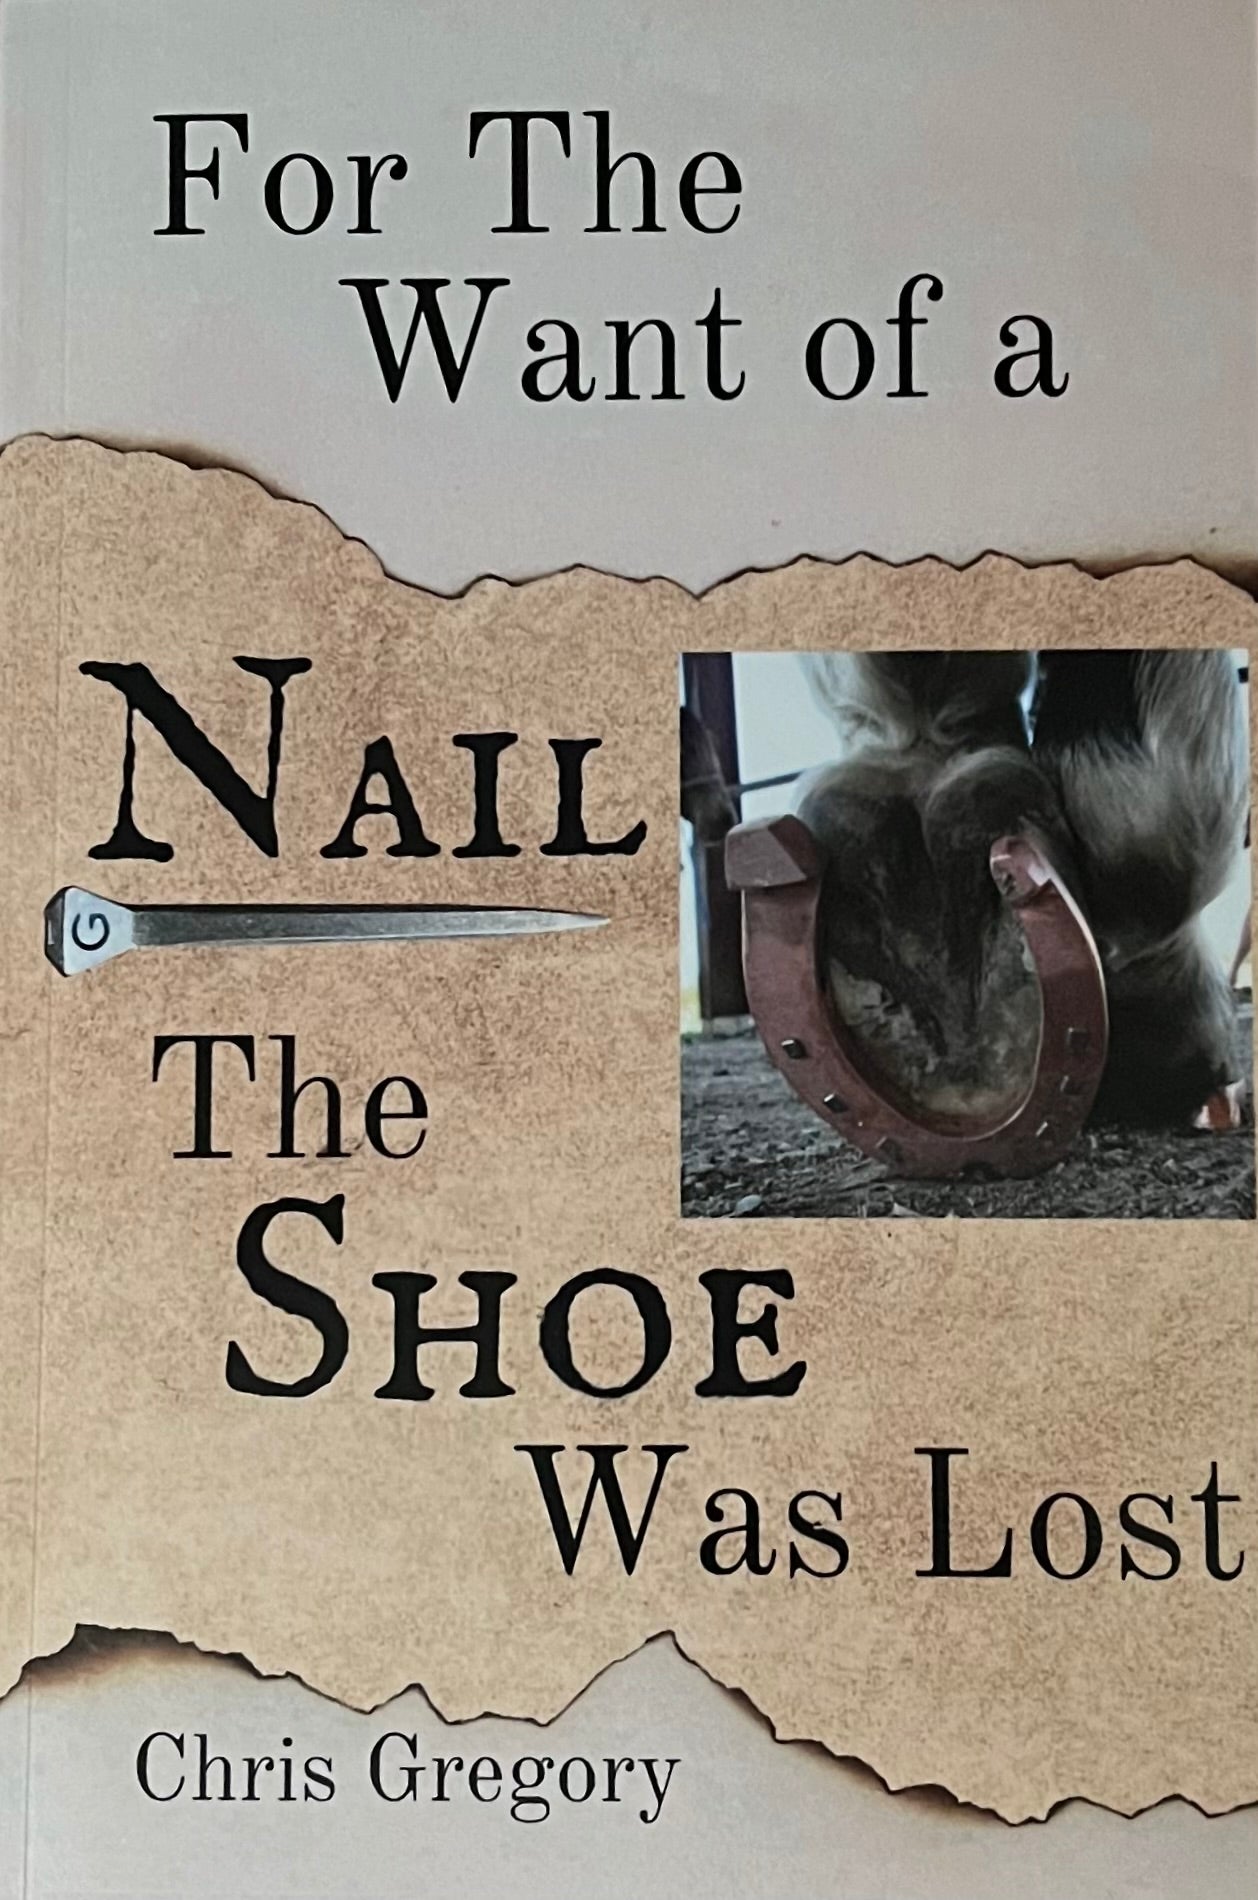 For the Want of A Nail, the Shoe Was Lost